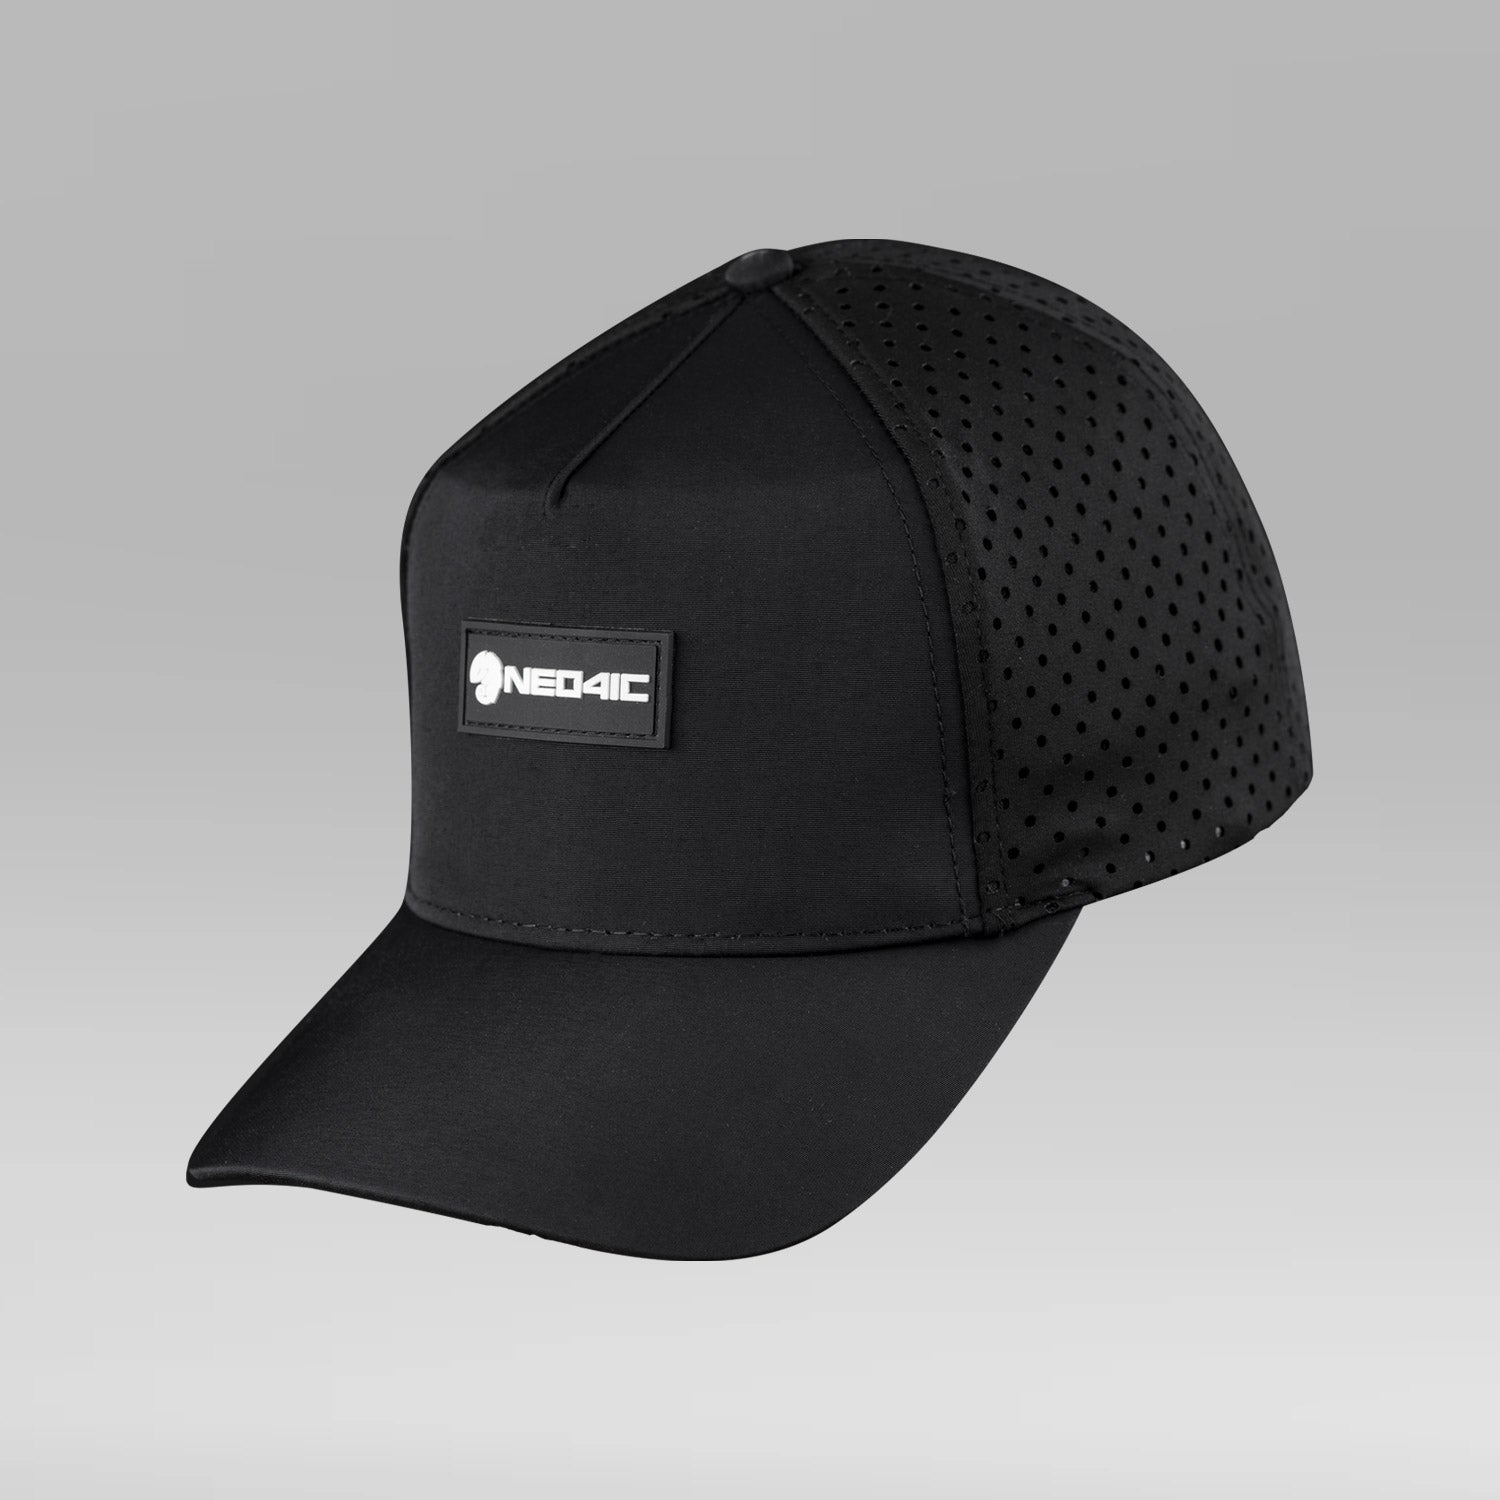 PERFORMANCE WATER RESISTANT CURVED BILL HAT